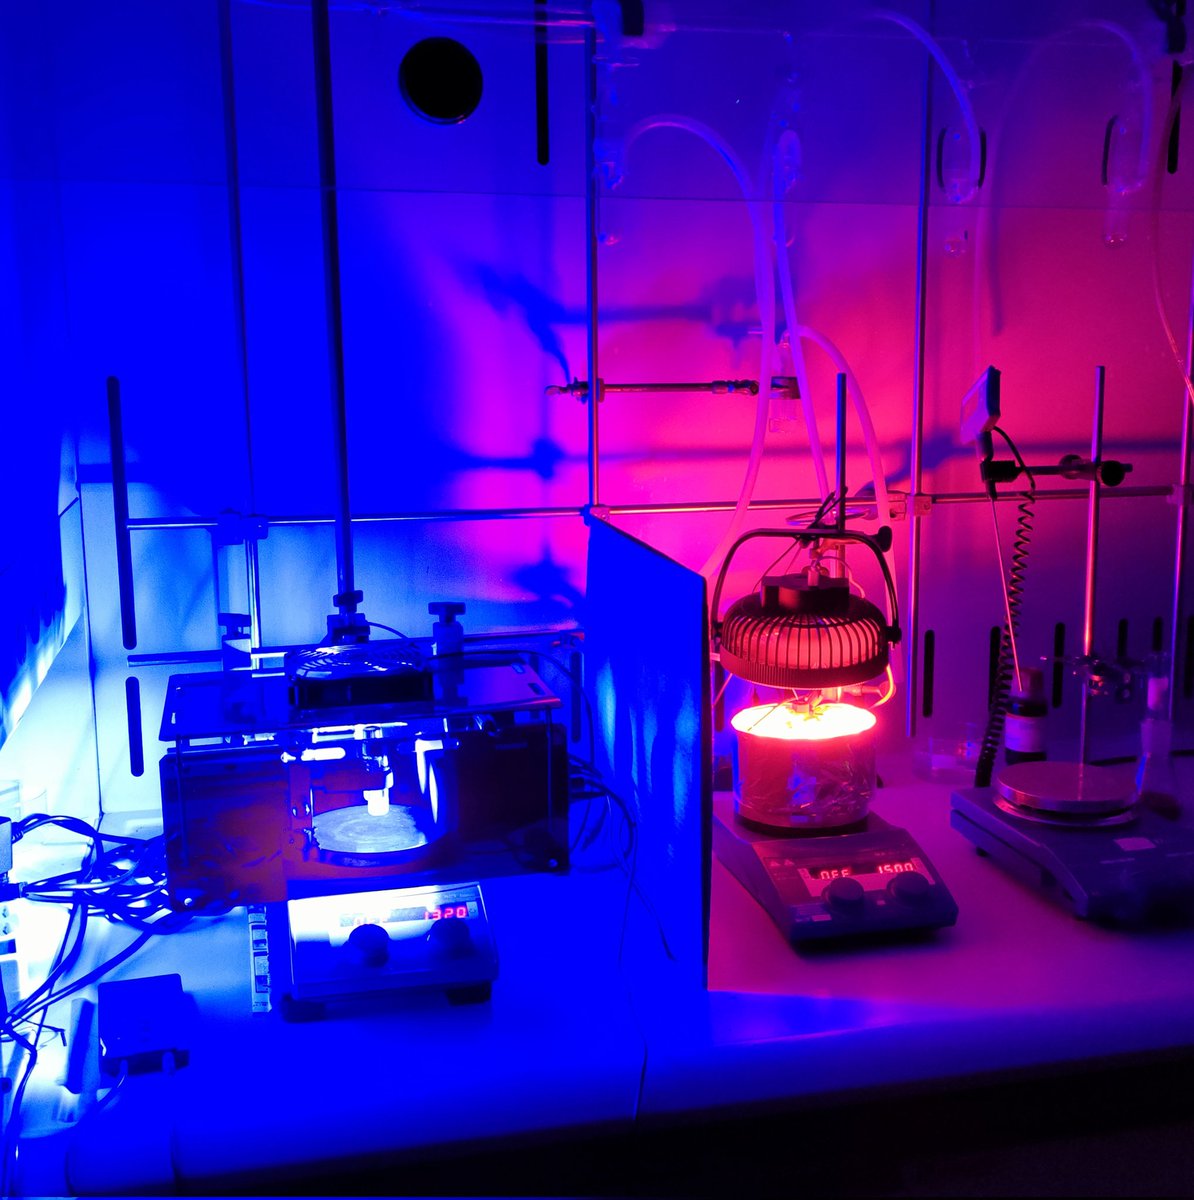 Second best thing about turning off the labs lights in the evening @dipchim @LabPrandi 💡 🧪🧬 #photochemistry #organicsynthesis